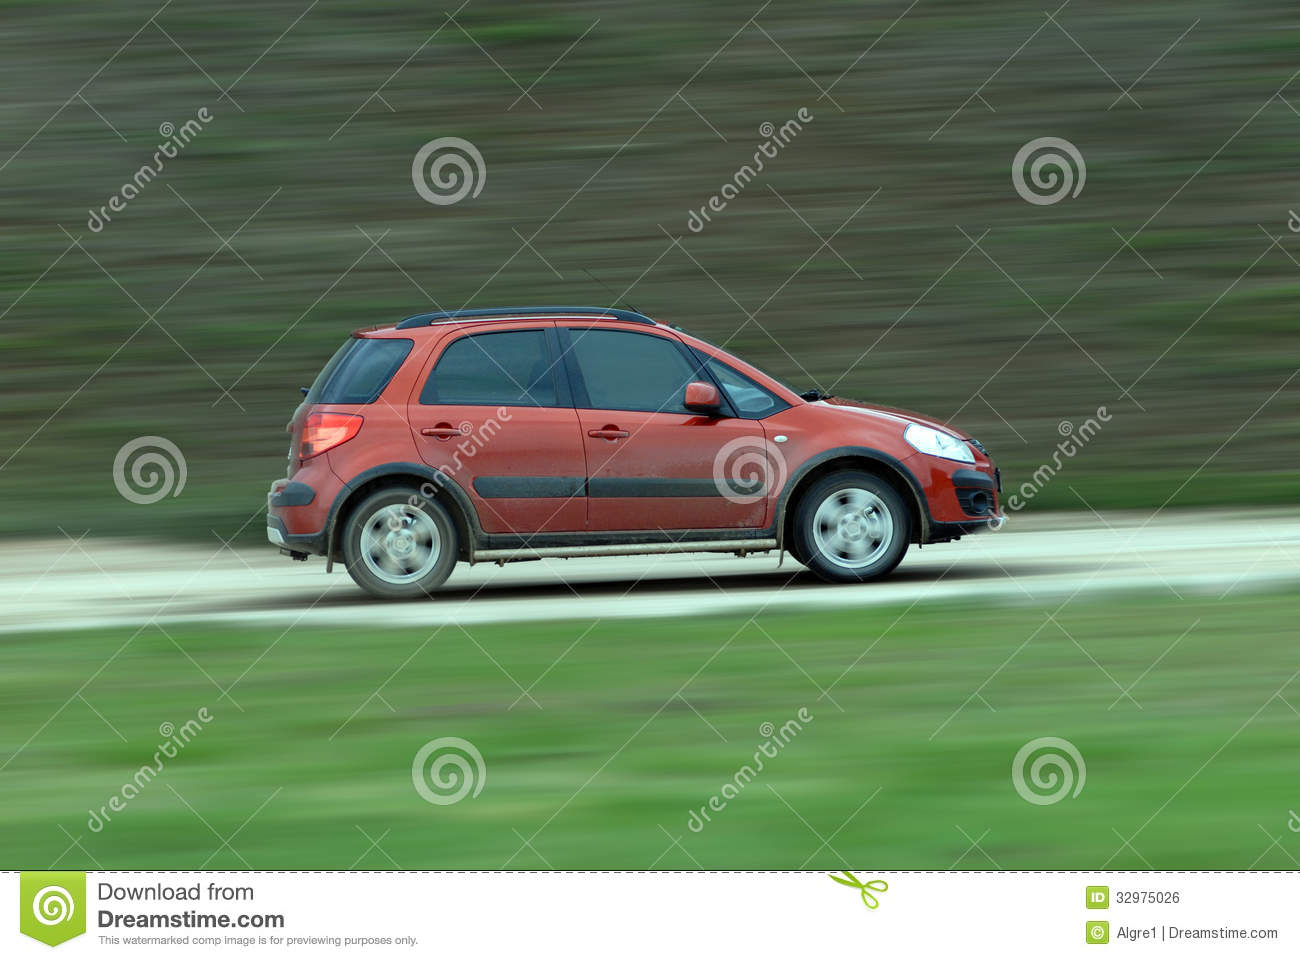 Suv Driving On Country Road Royalty Free Stock Image   Image  32975026